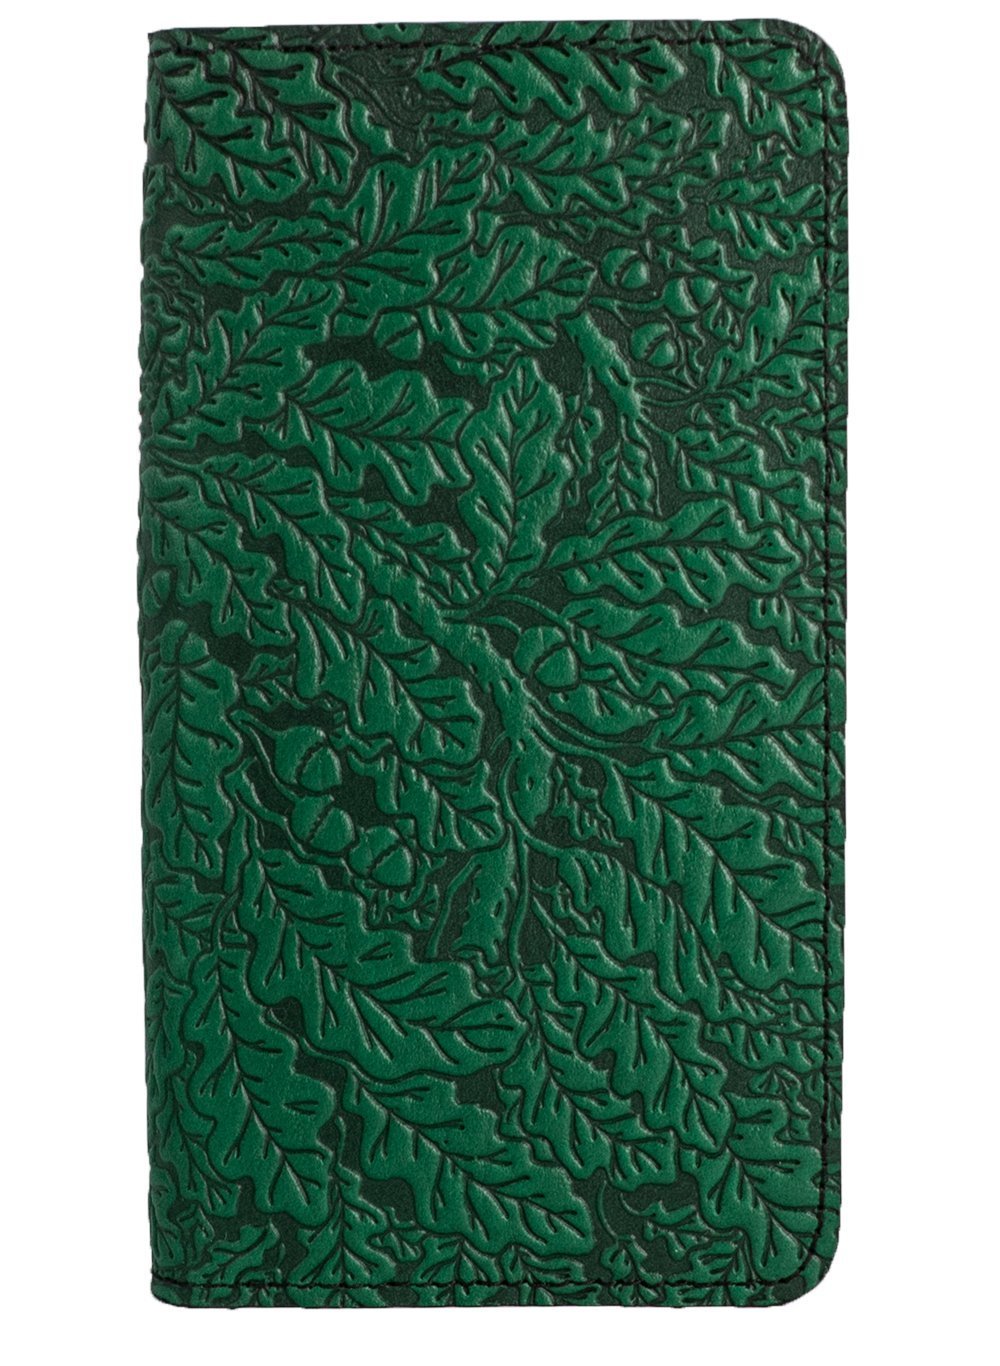 Oberon Design Small Oberon Design Small Leather Smartphone Wallet Case, Oak Leaves in Green